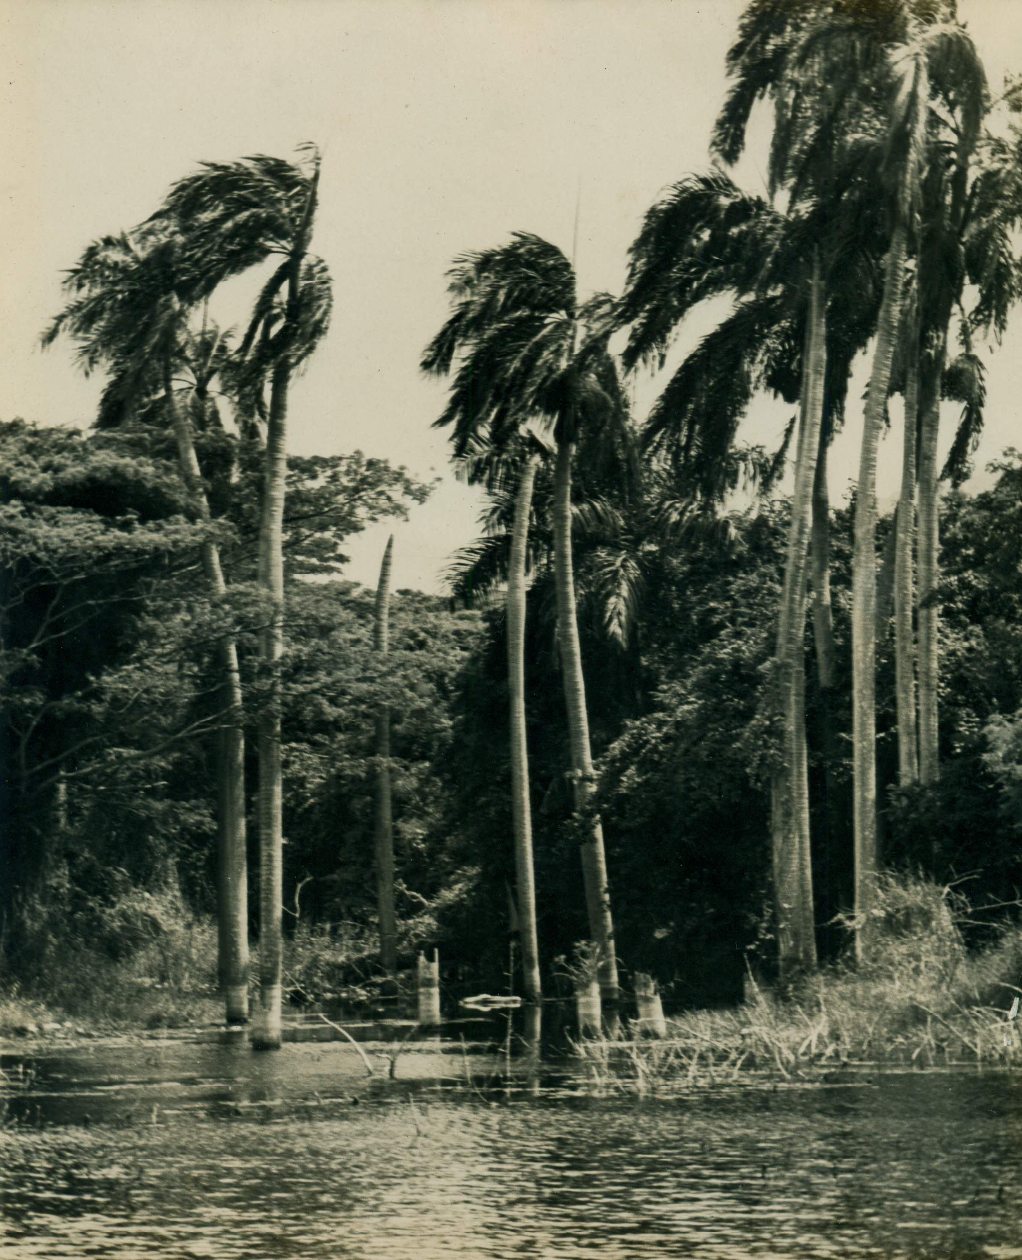 The native Royal Palms (Roystonea borinquena) on St. Croix were common on estates like Castle Burke. The Castle Burke park site was naturally blessed with an abundance of water, rich soil, a freshwater pond, a wildlife haven, and natural botanical gardens along two great waterways -Bethlehem and Castle Burke - but both streams are contaminated today with human pollutants. (Image courtesy Olasee Davis)